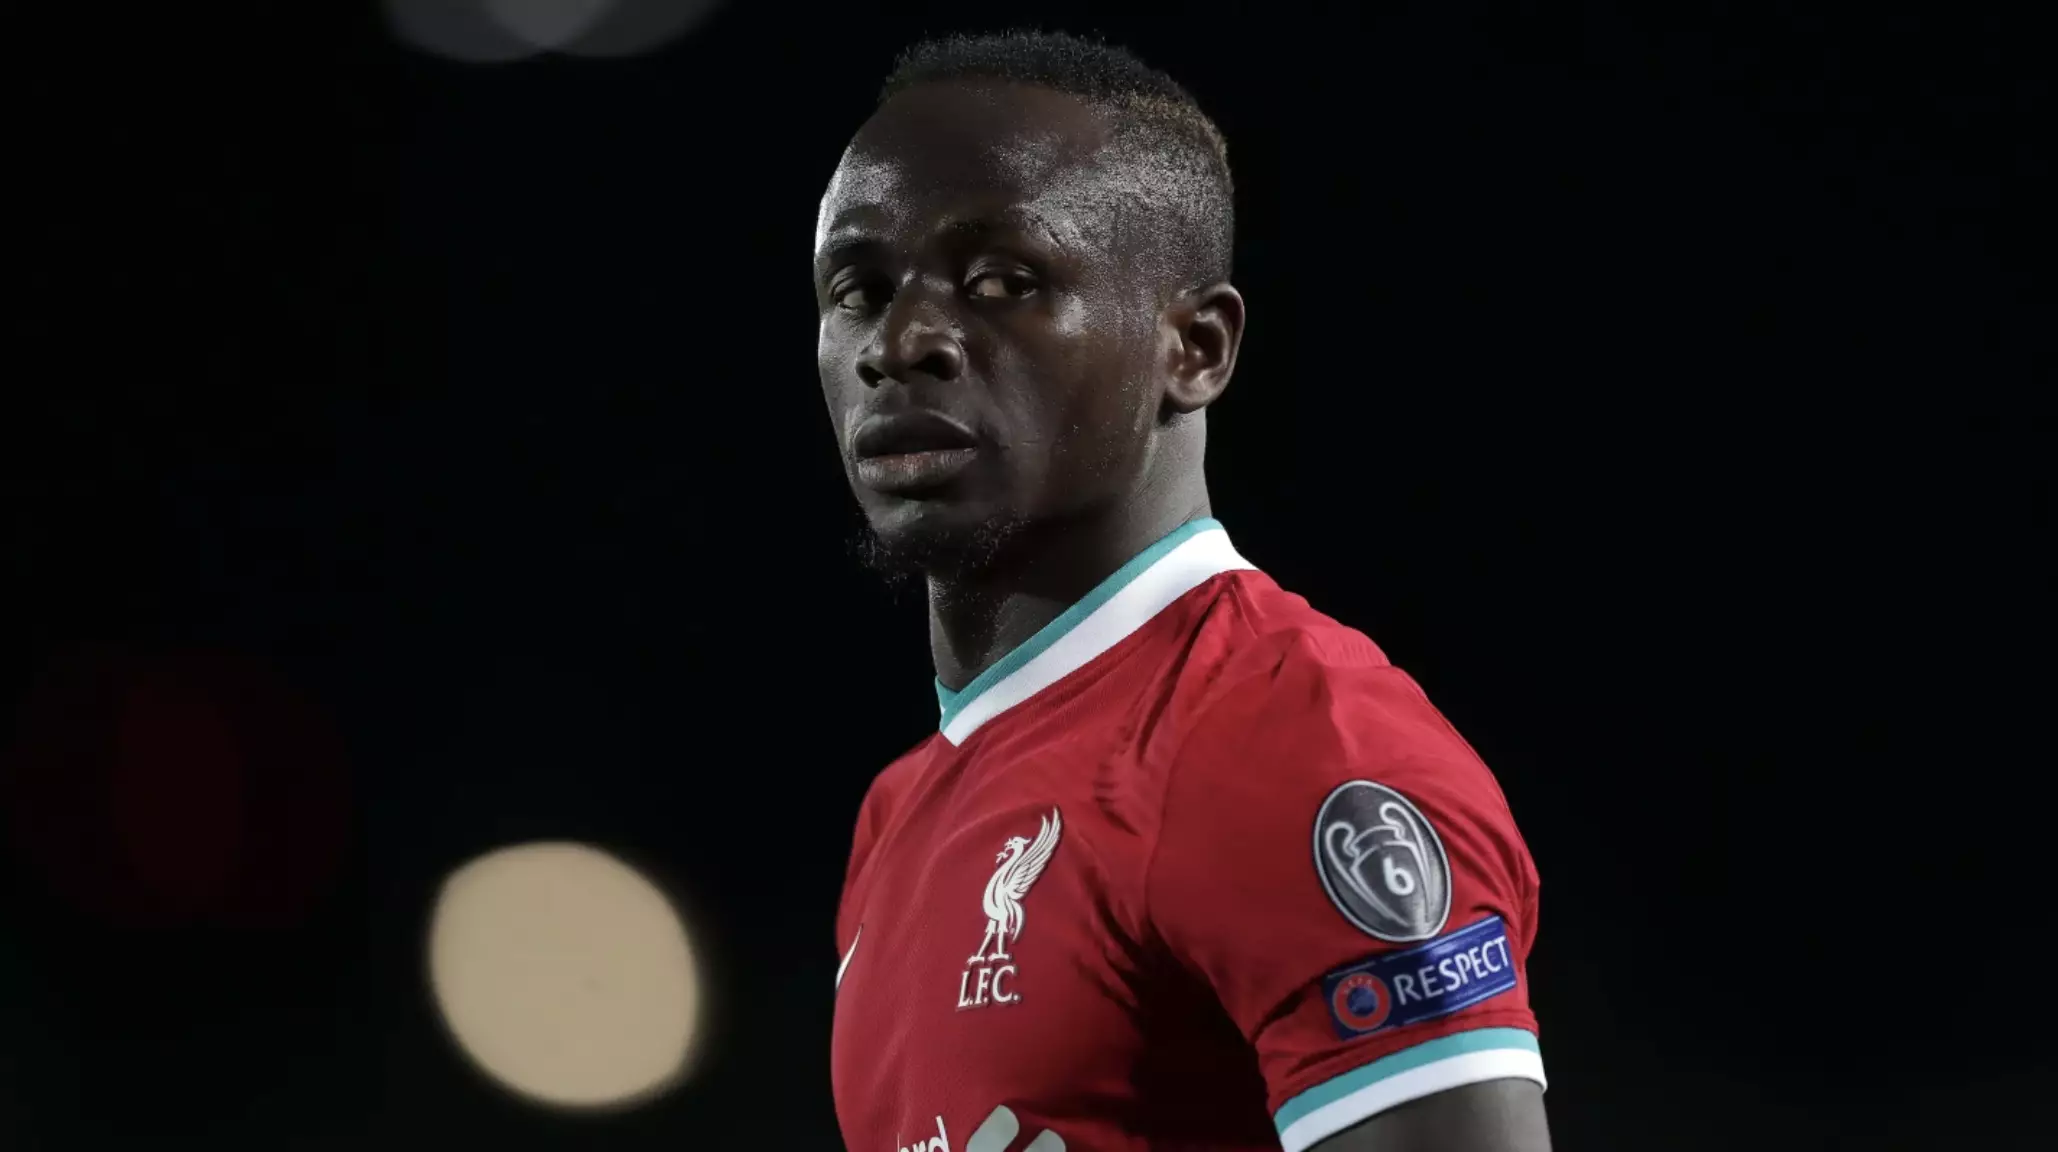 Sadio Mane is almost certain to start Liverpool's last game and might have a point to prove